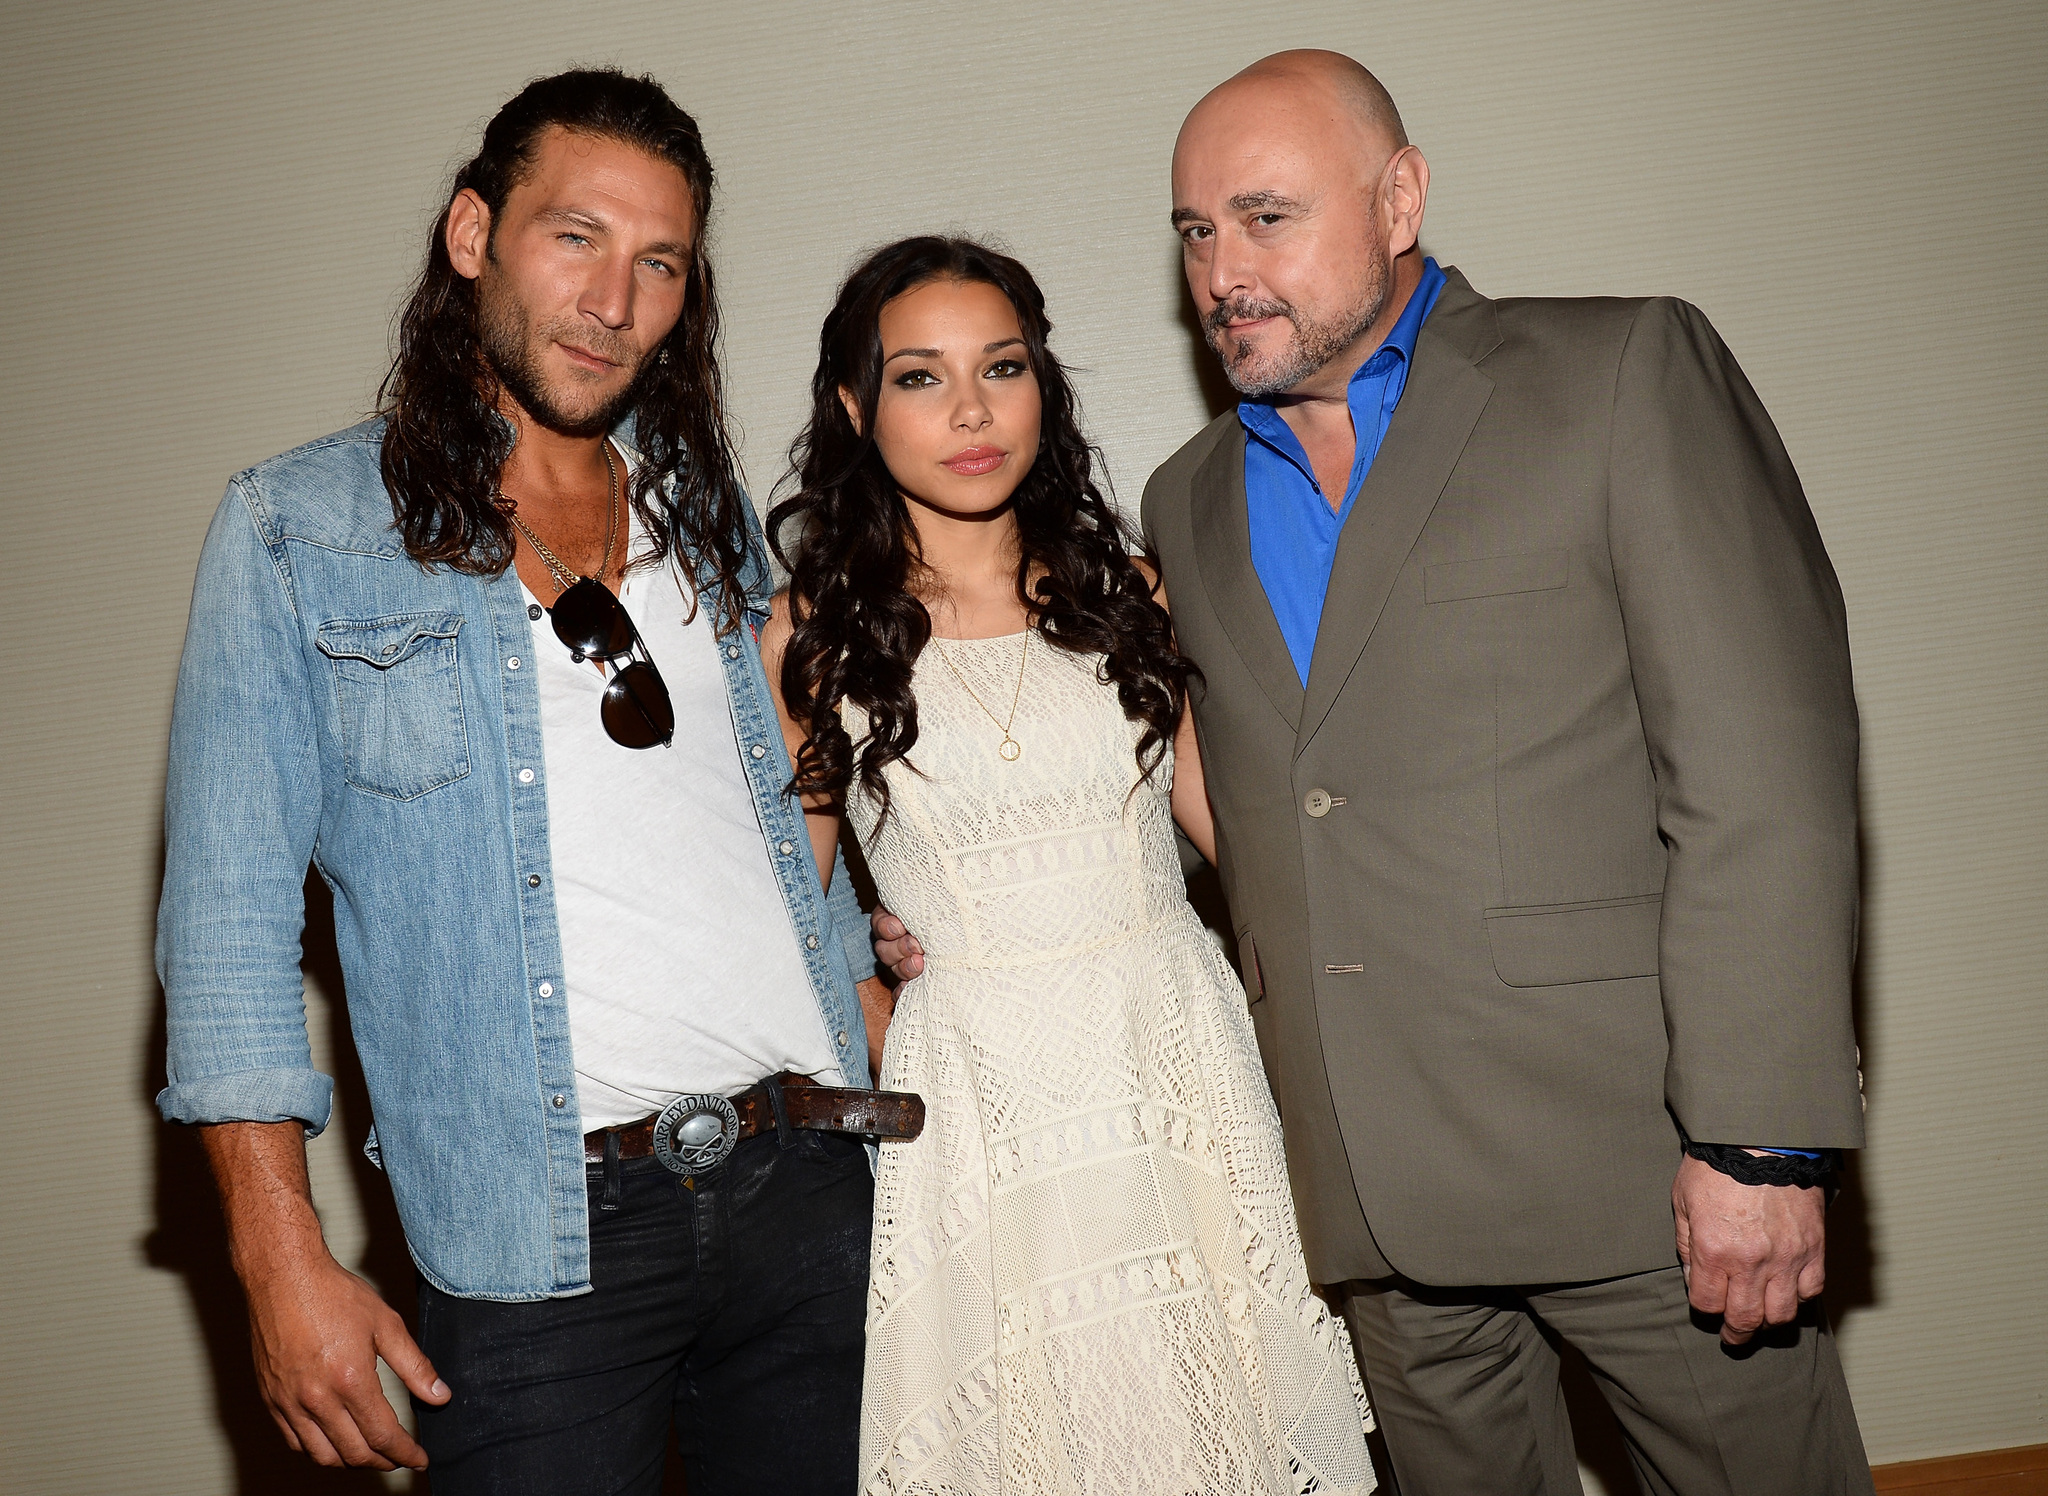 Mark Ryan, Zach McGowan and Jessica Parker Kennedy at event of Black Sails (2014)